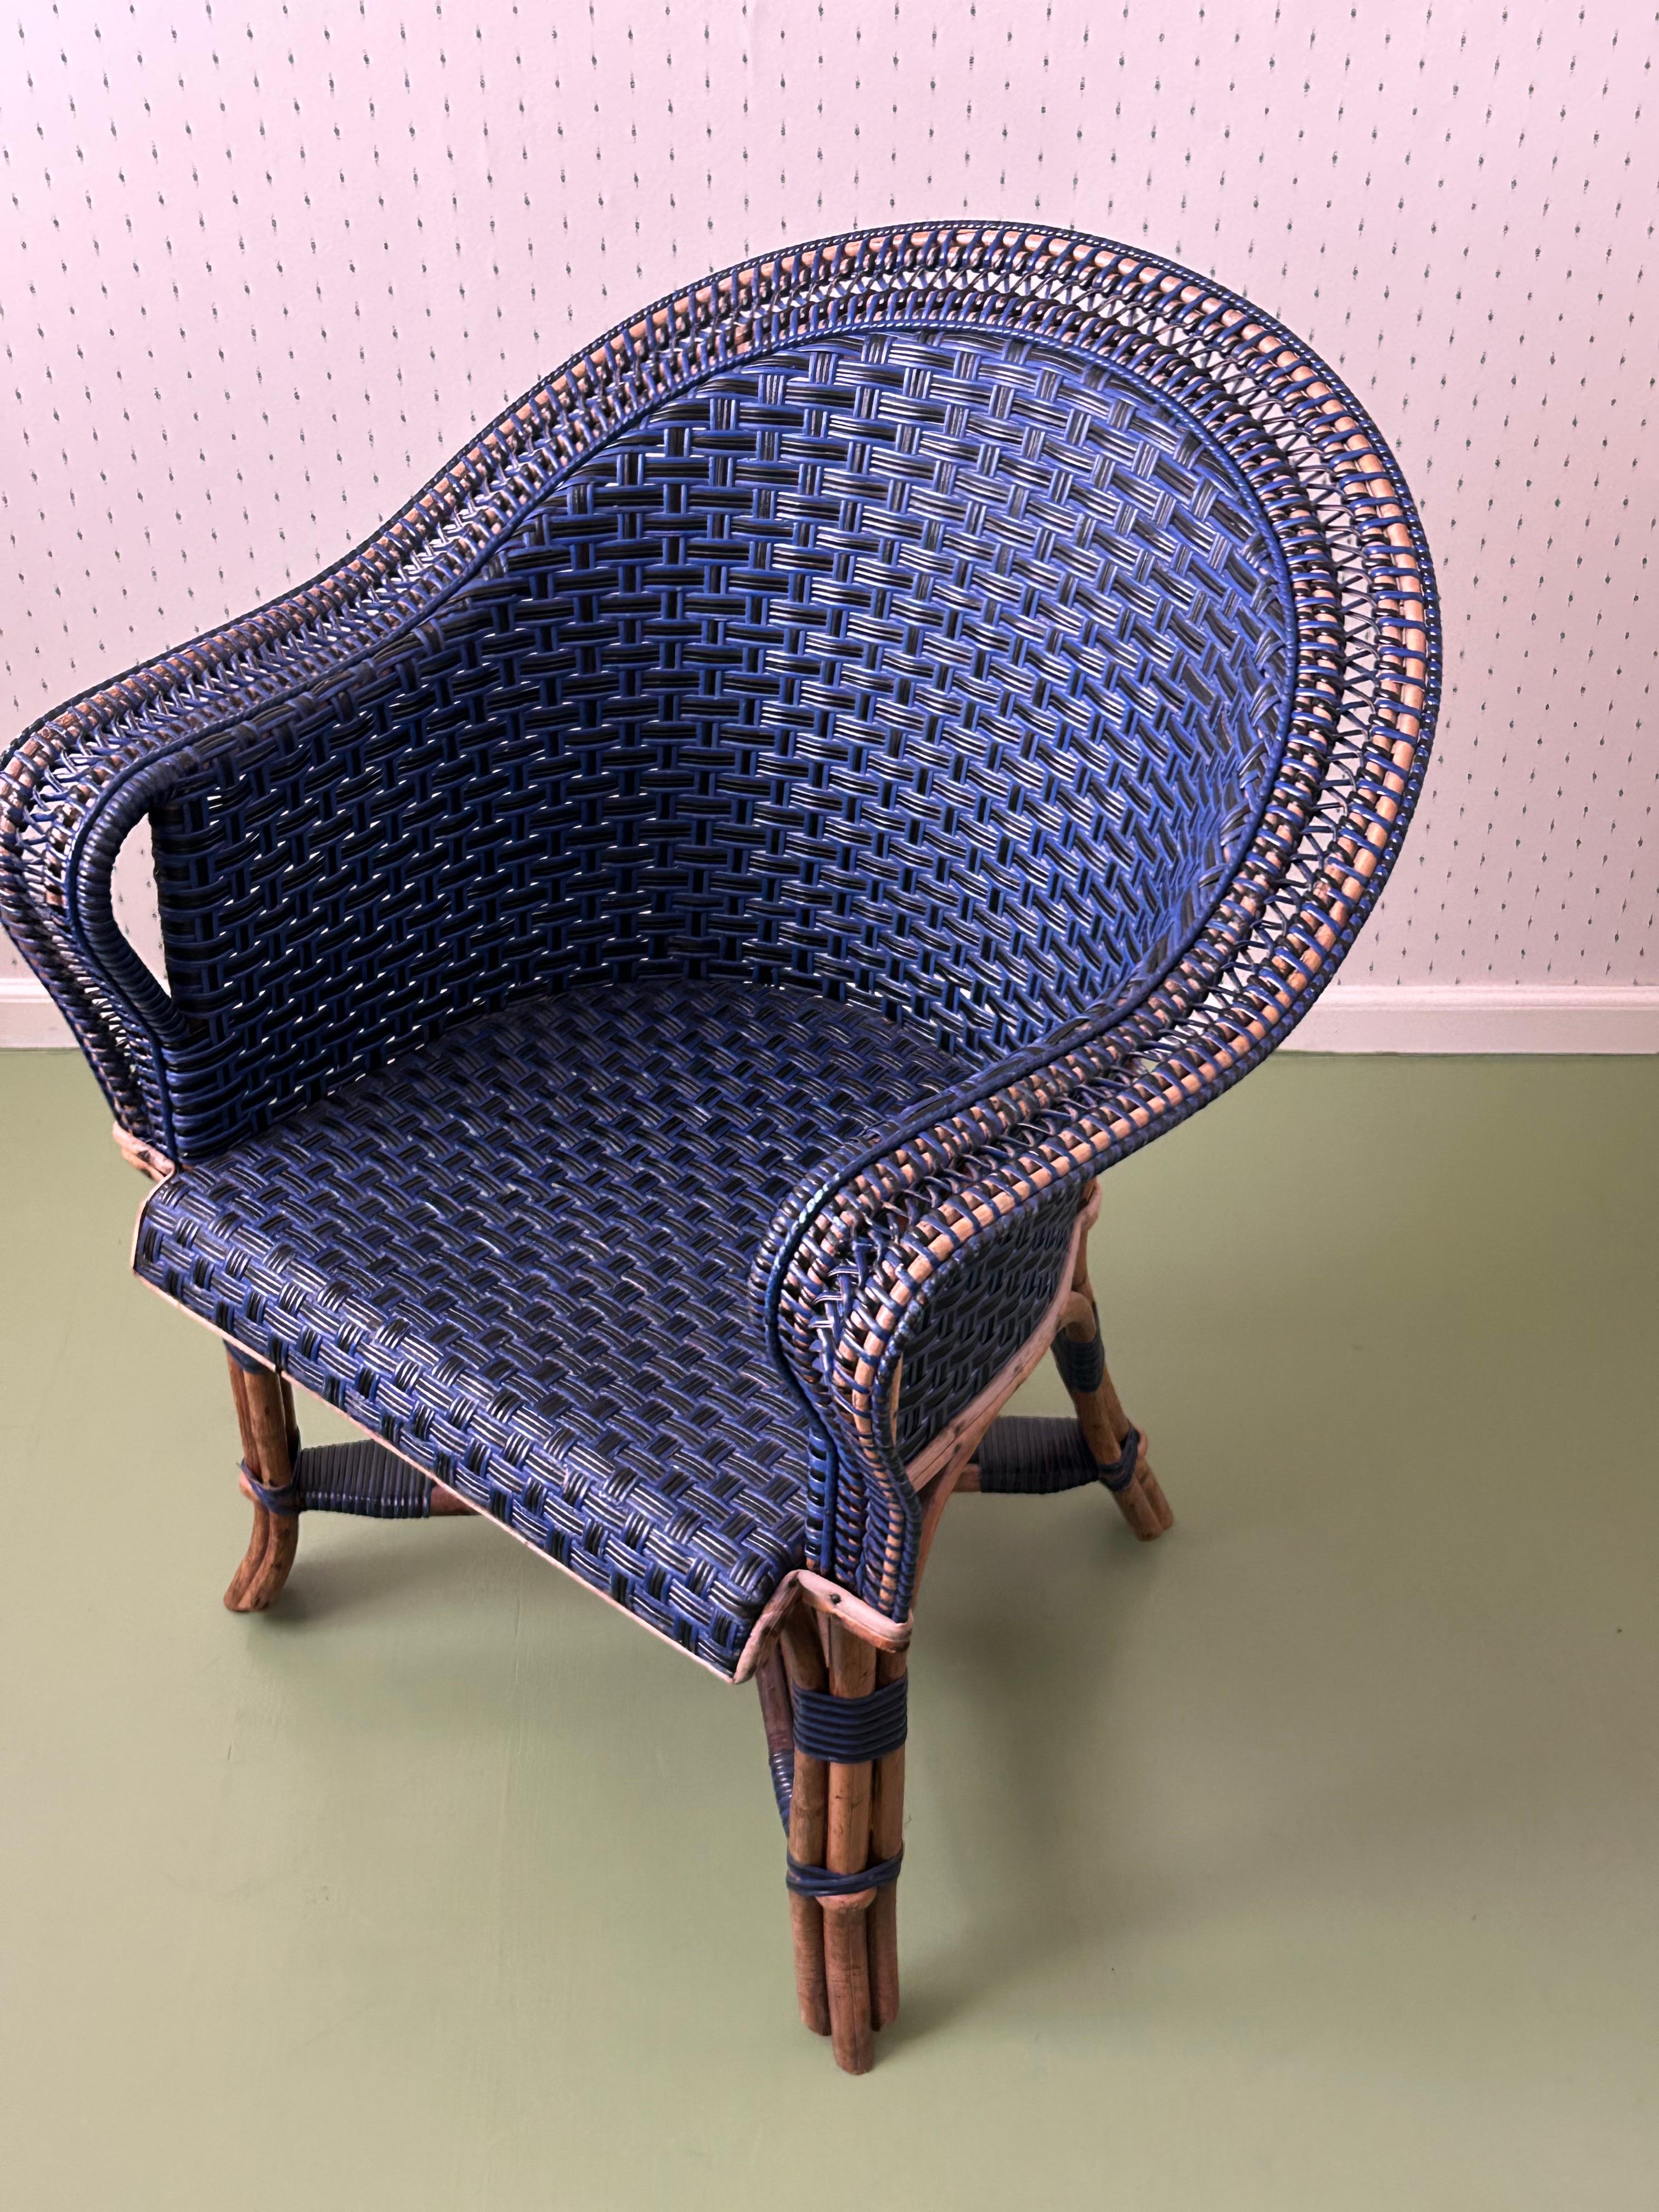 Vintage Rattan Chair in Black and Blue, France, Early 20th Century For Sale 2